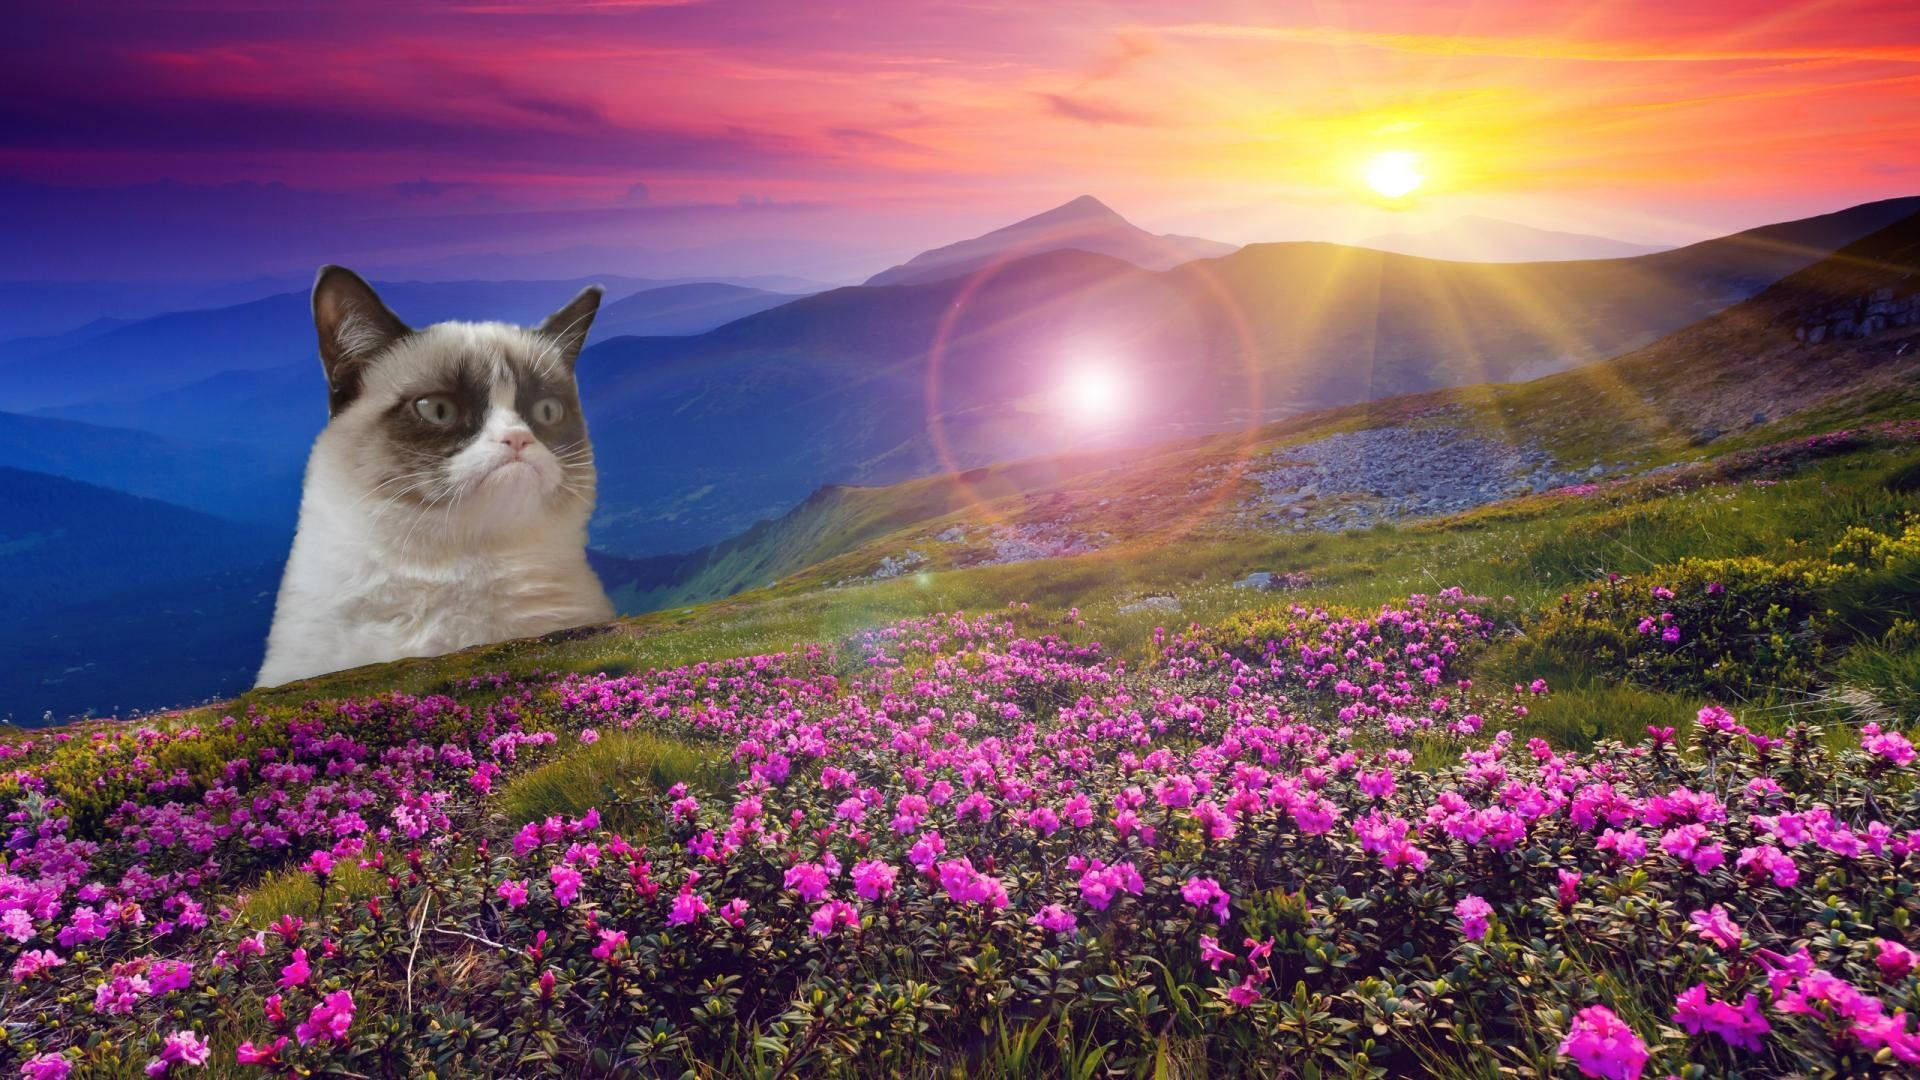 Cat meme with serious face on flower field with sunlight wallpaper.